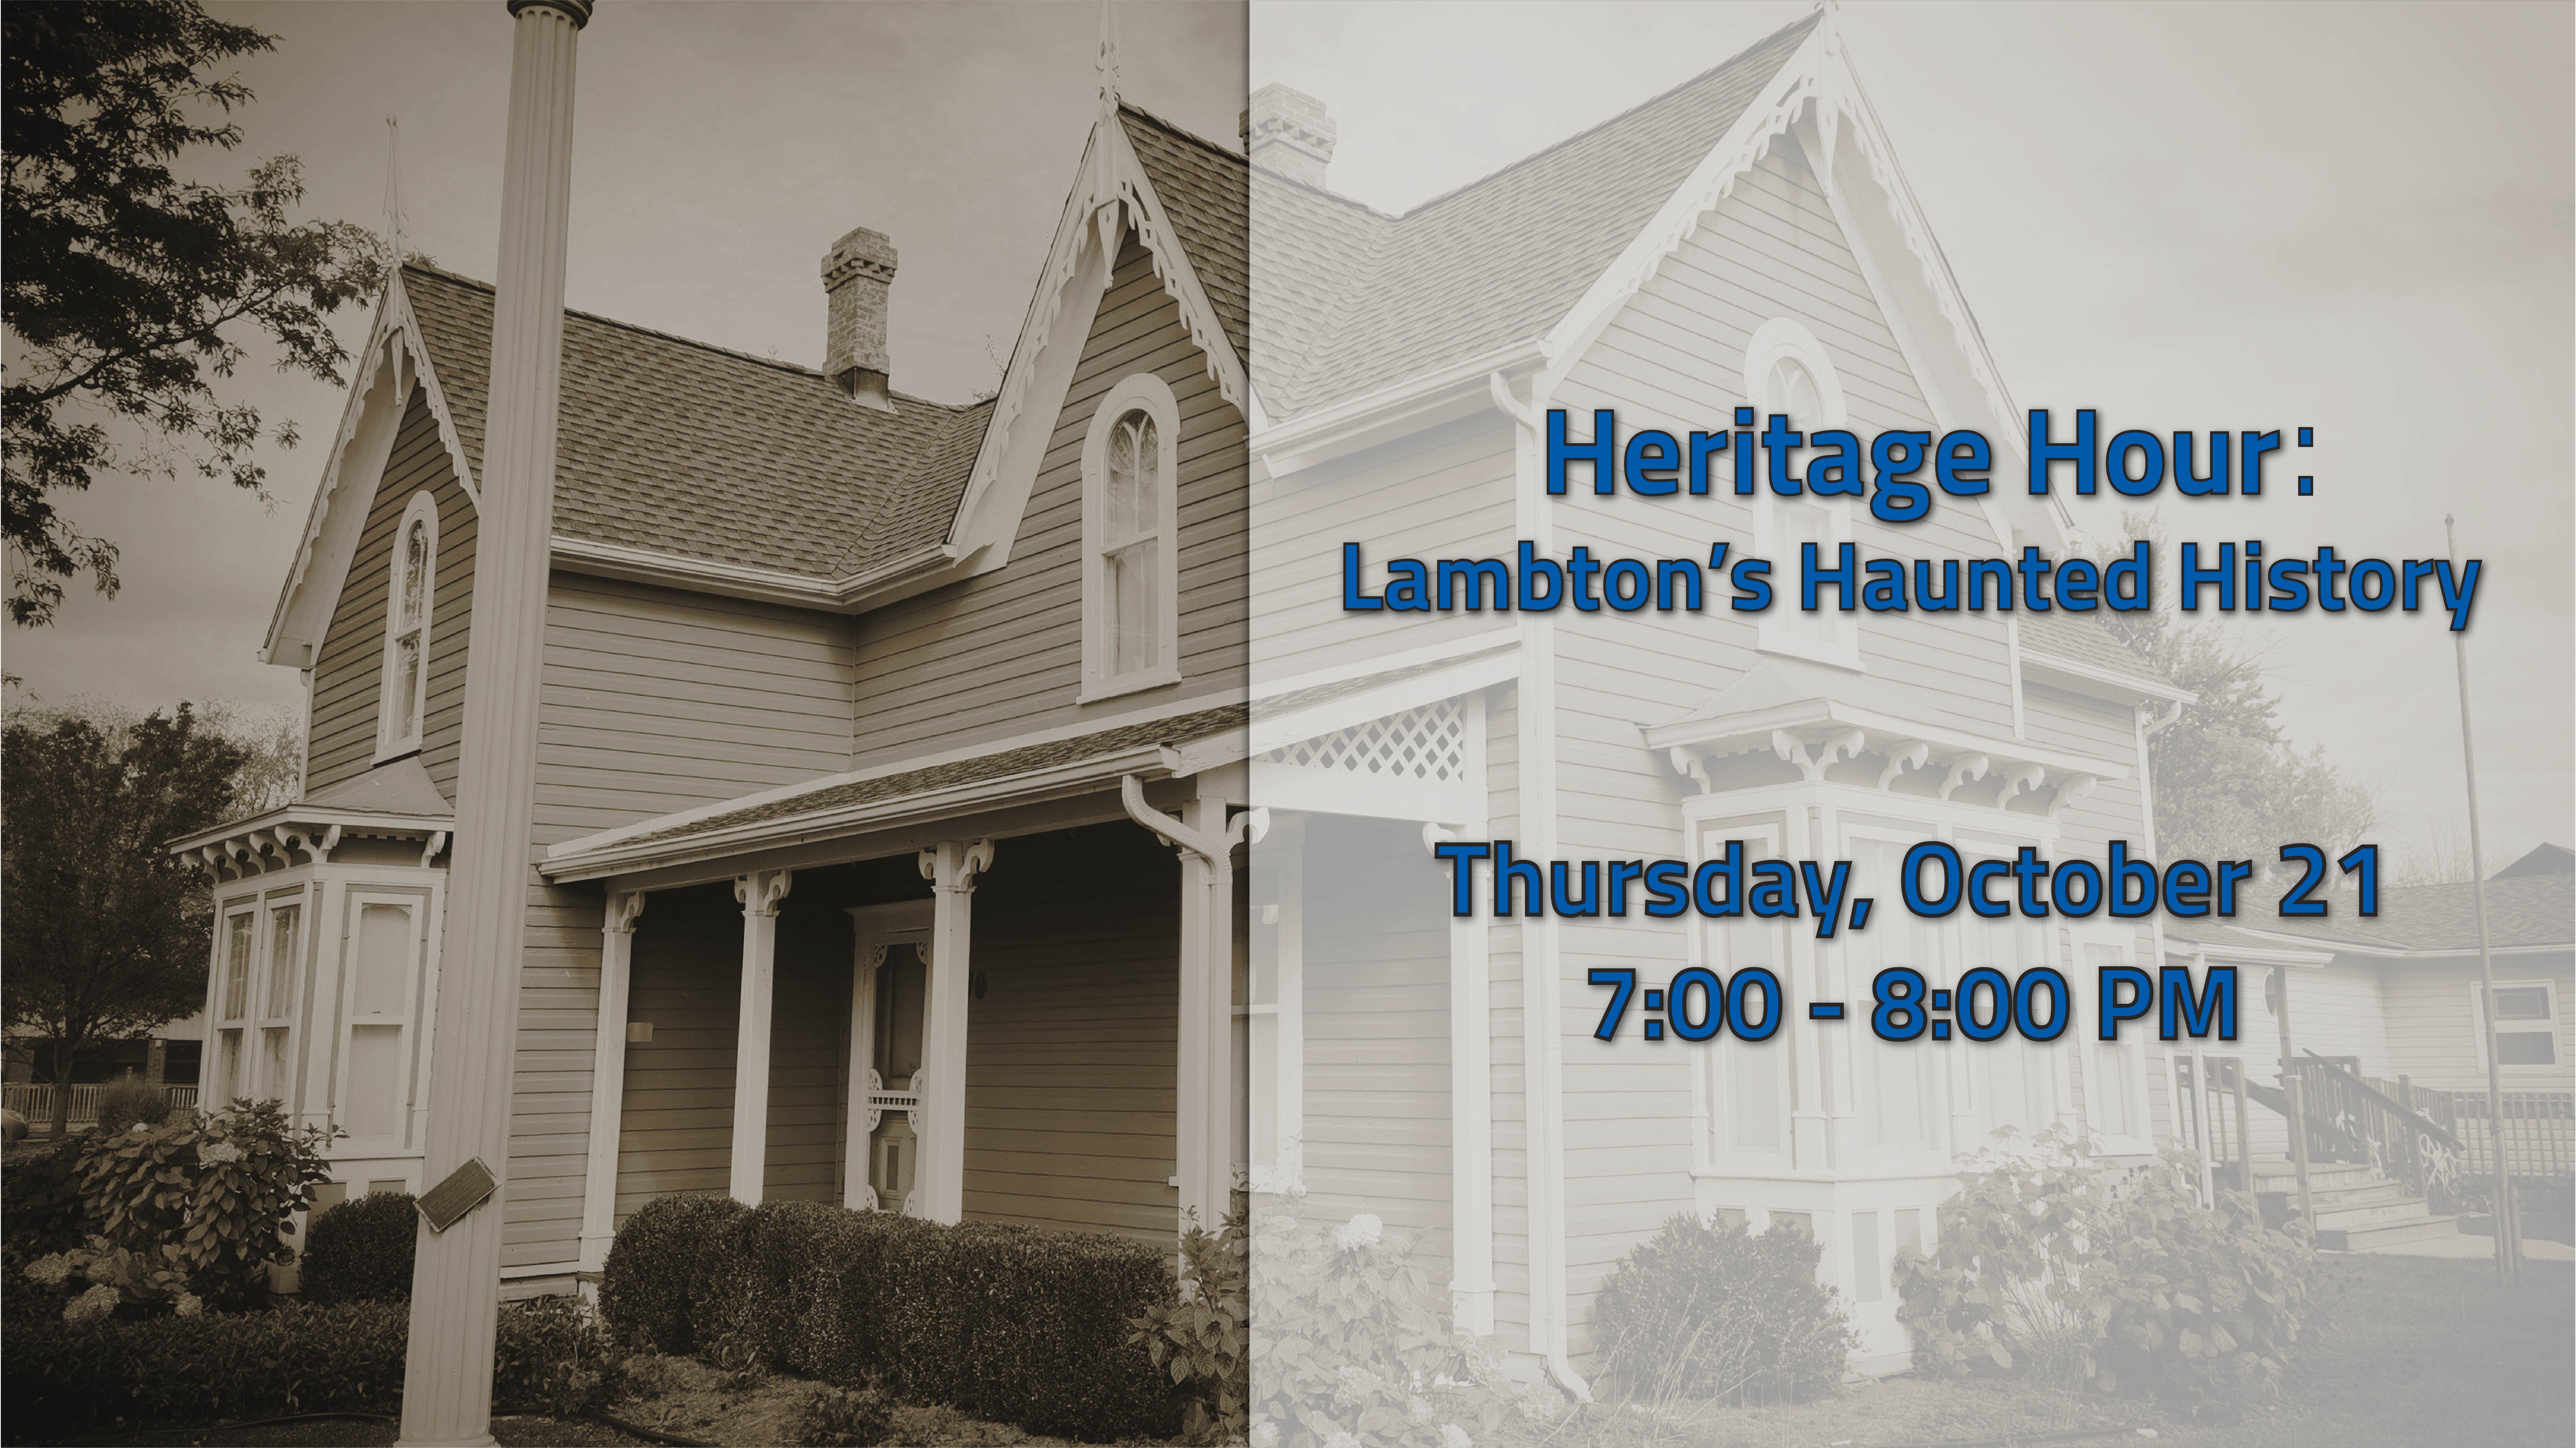 Heritage Hour event graphic with text, "Heritage Hour: Lambton's Haunted History, Thursday, October 21, 7:00 - 8:00 PM."